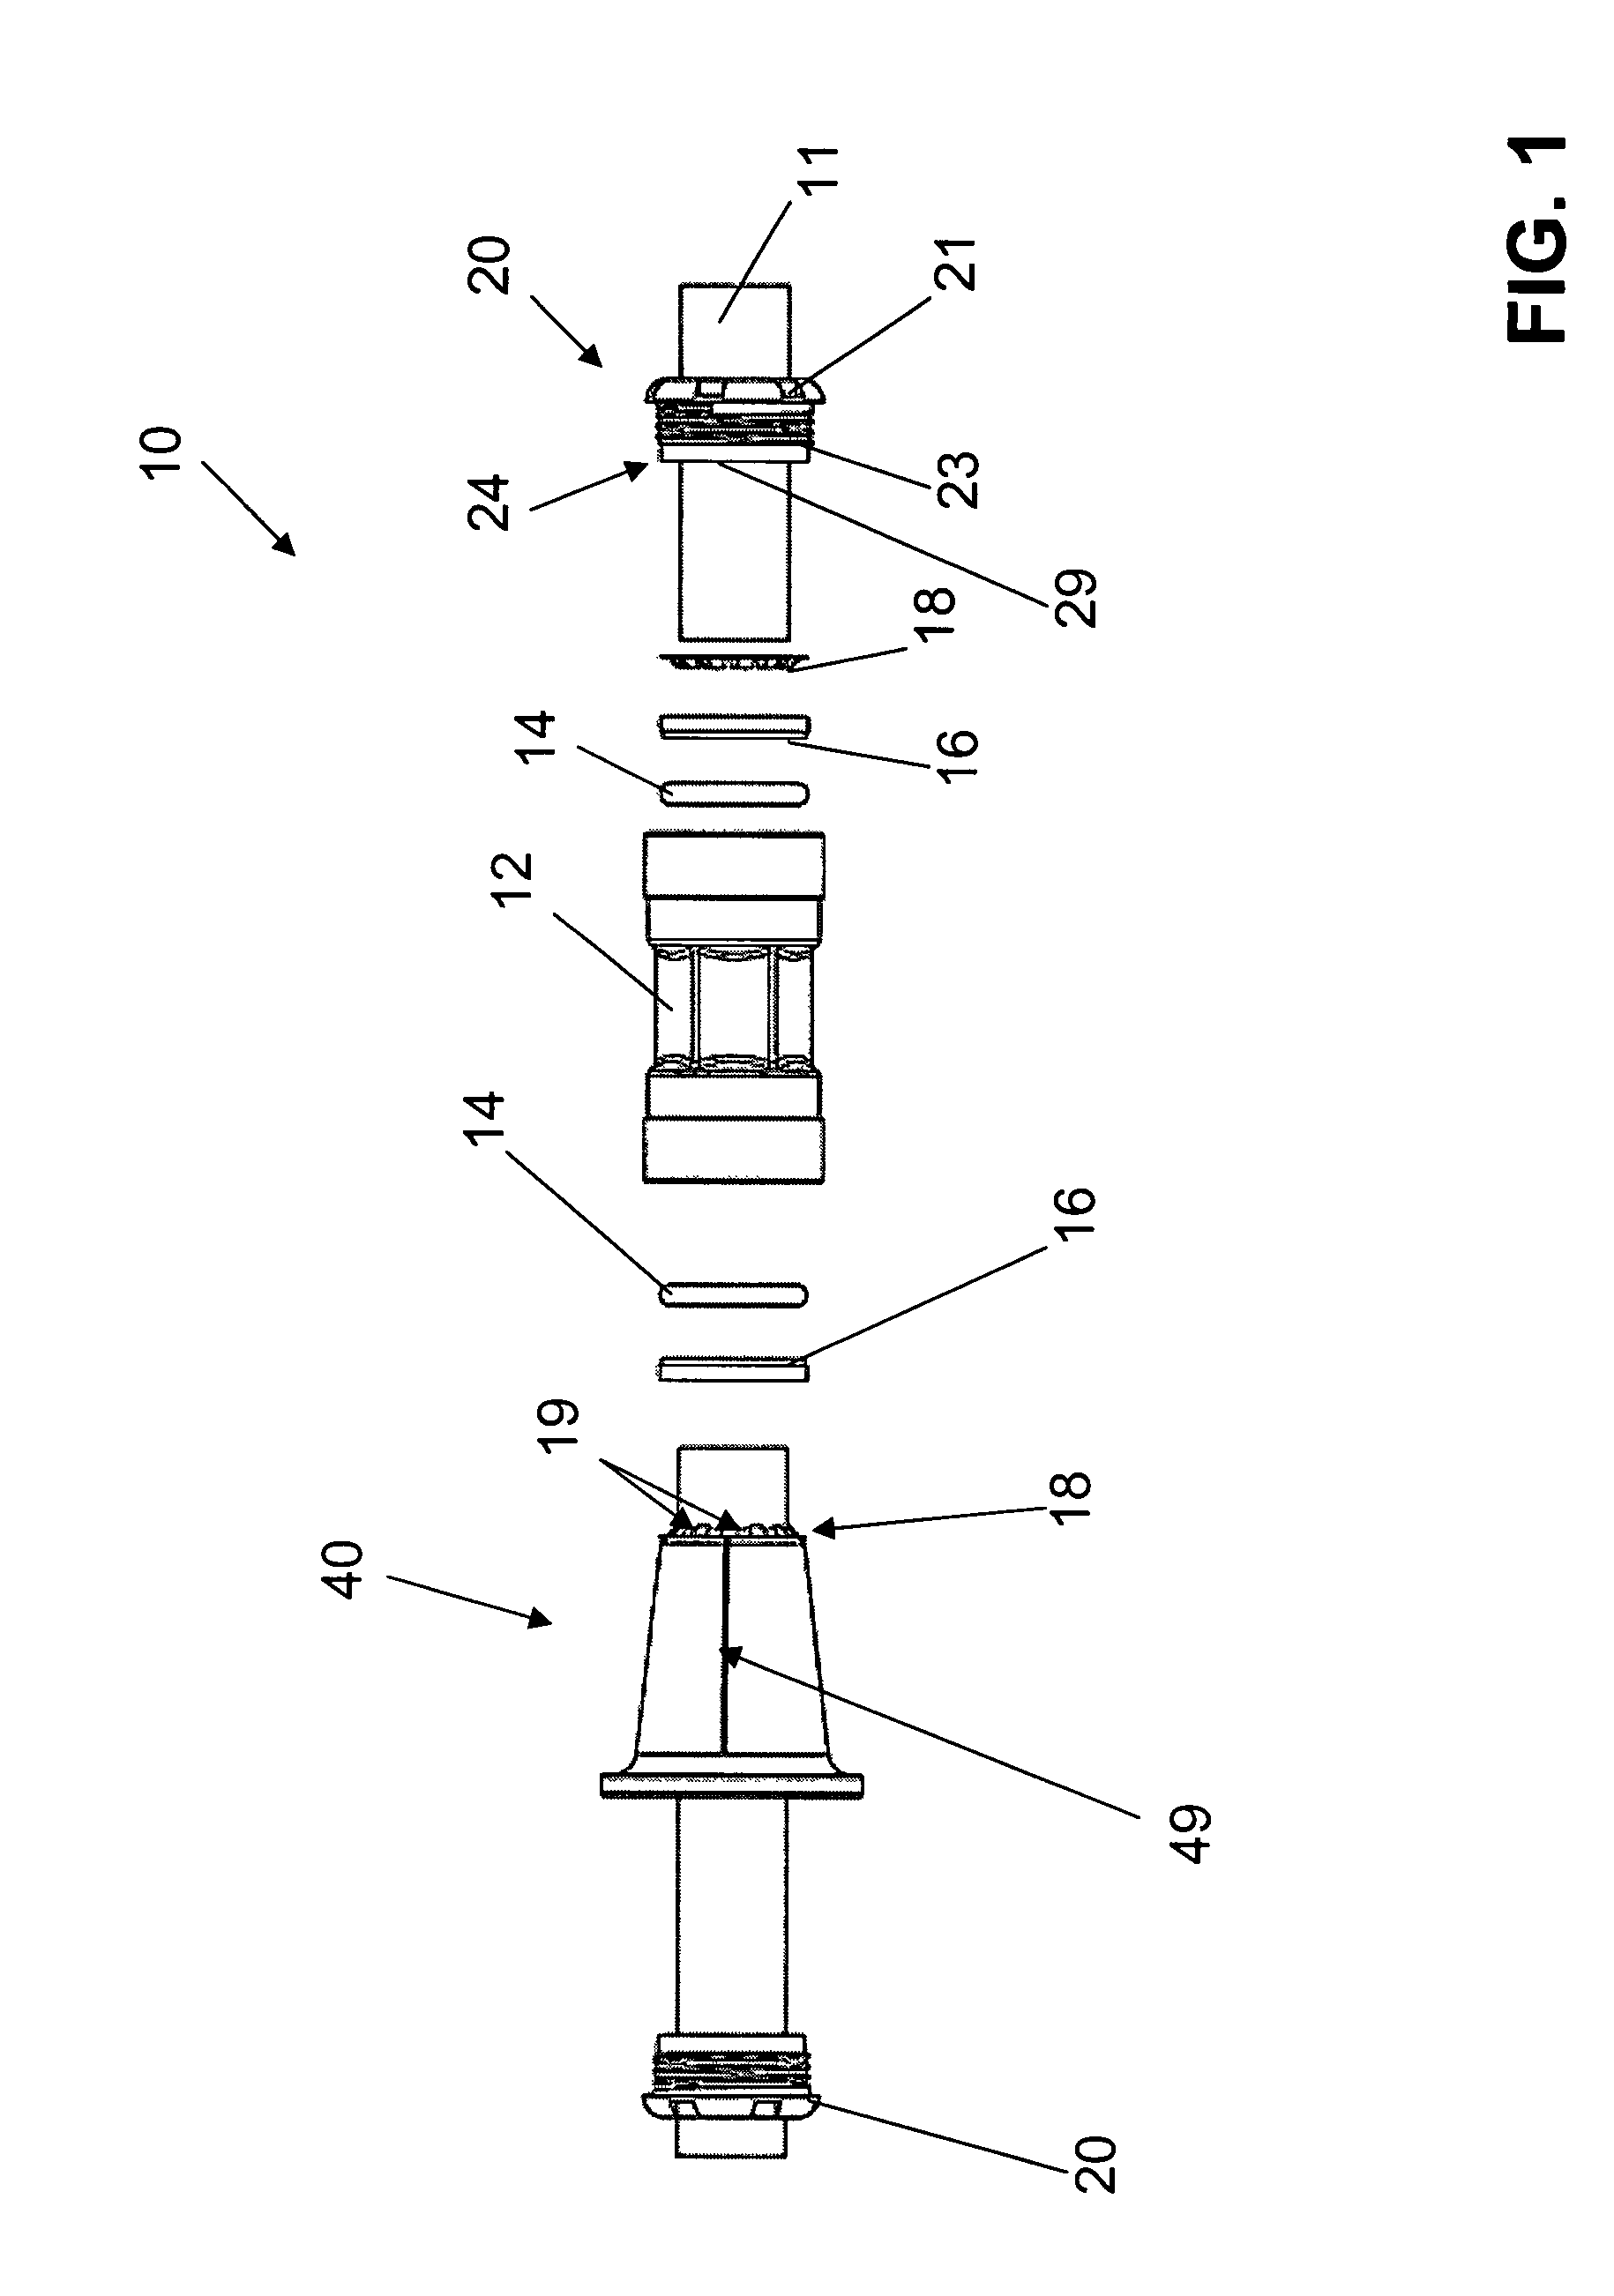 Piping joint assembly system and method